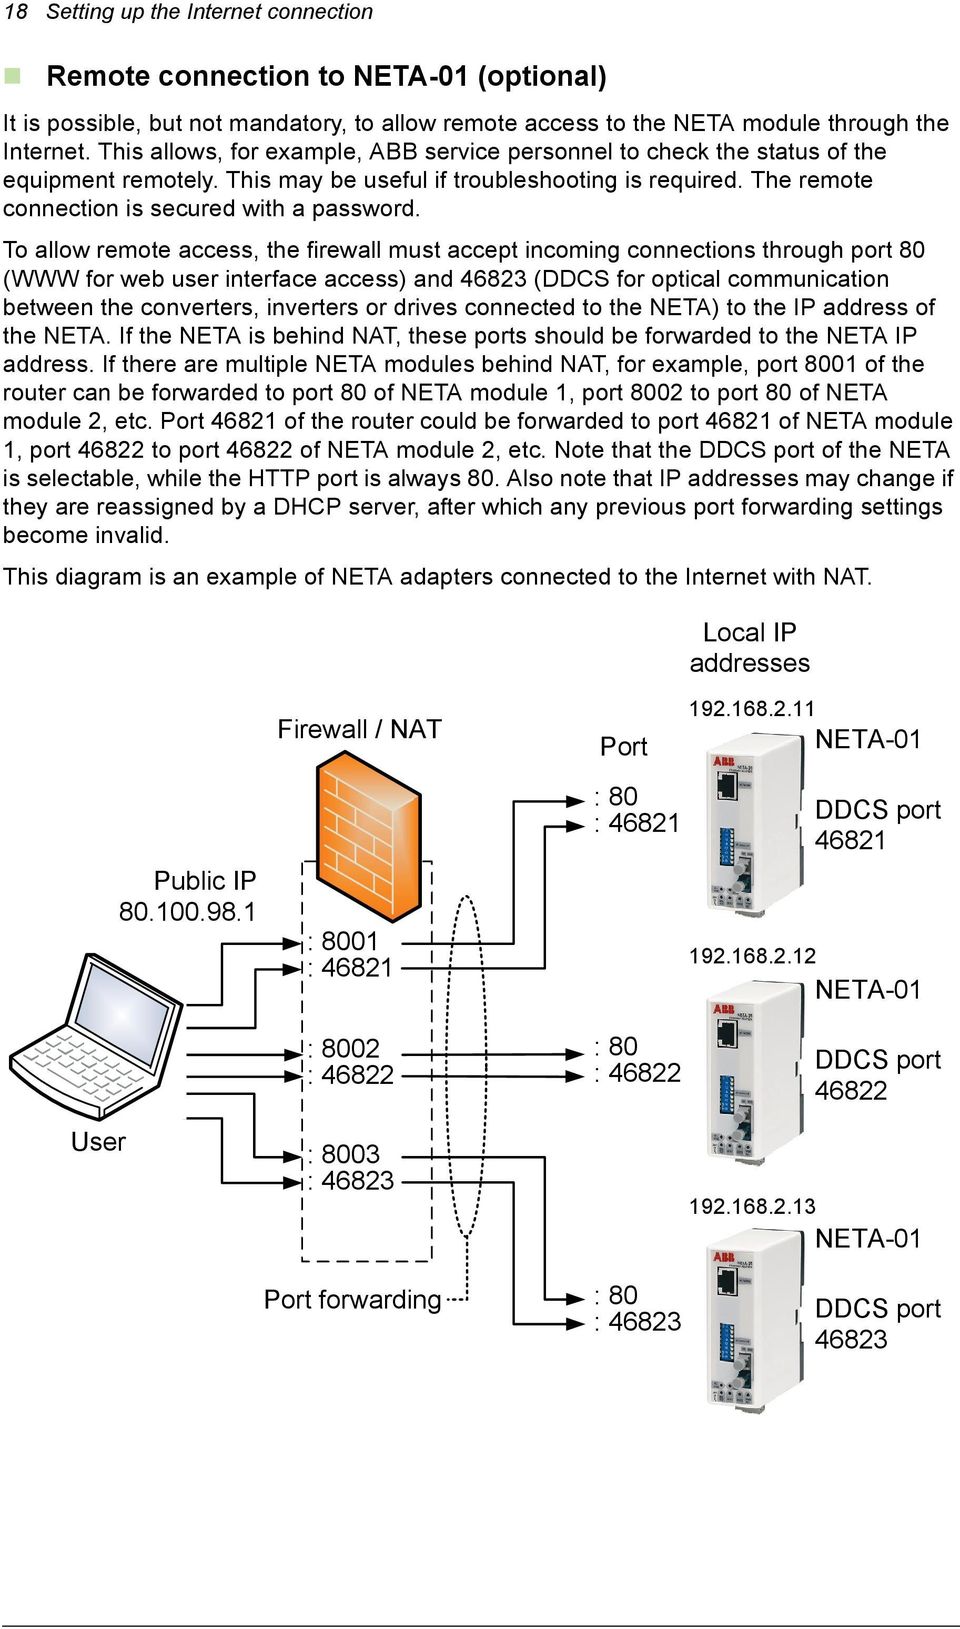 To allow remote access, the firewall must accept incoming connections through port 80 (WWW for web user interface access) and 46823 (DDCS for optical communication between the converters, inverters